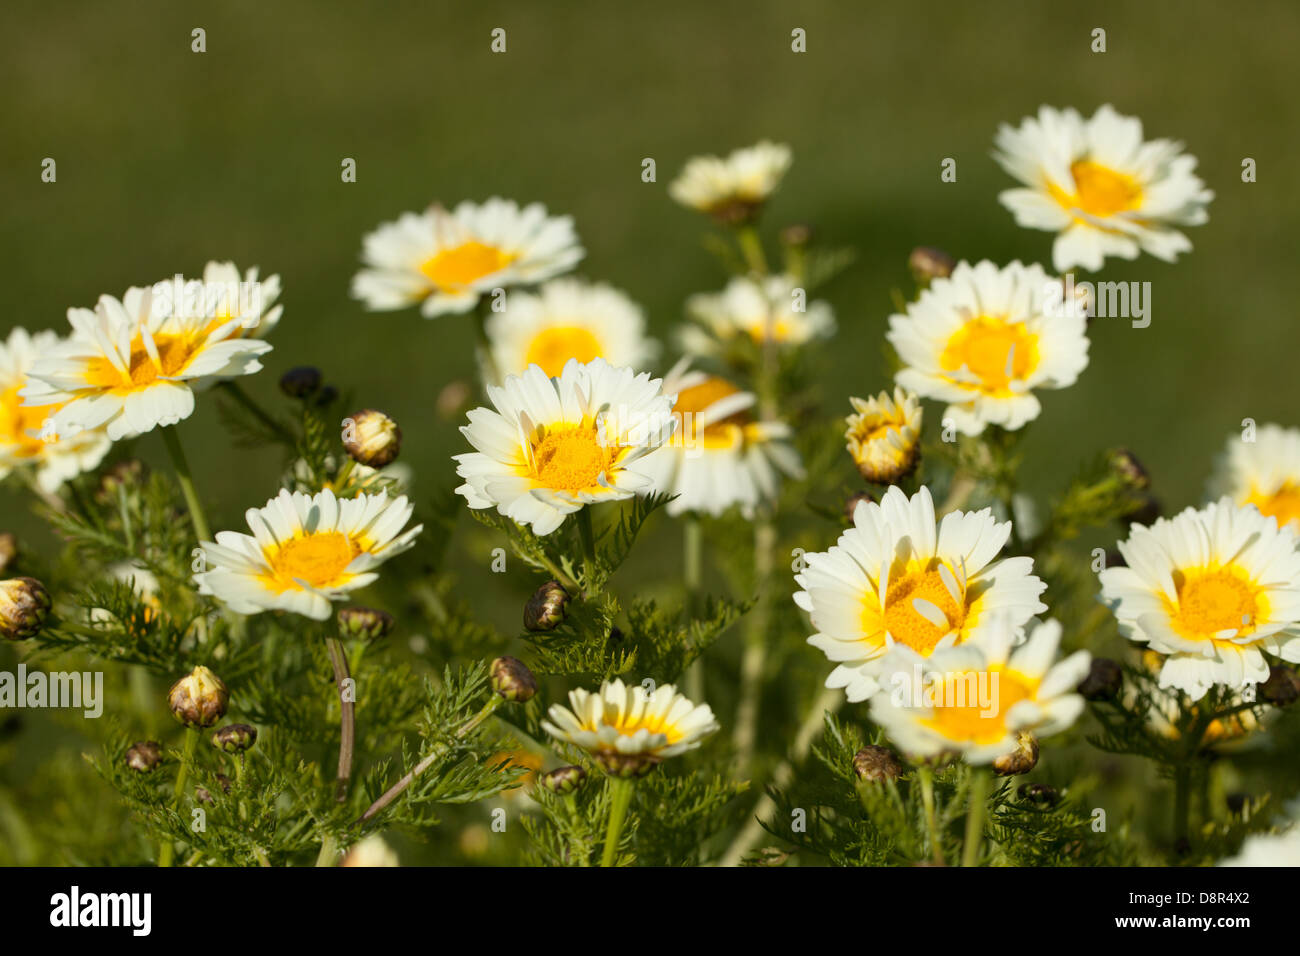 Yellow anthemis flowers in the spring garden Stock Photo